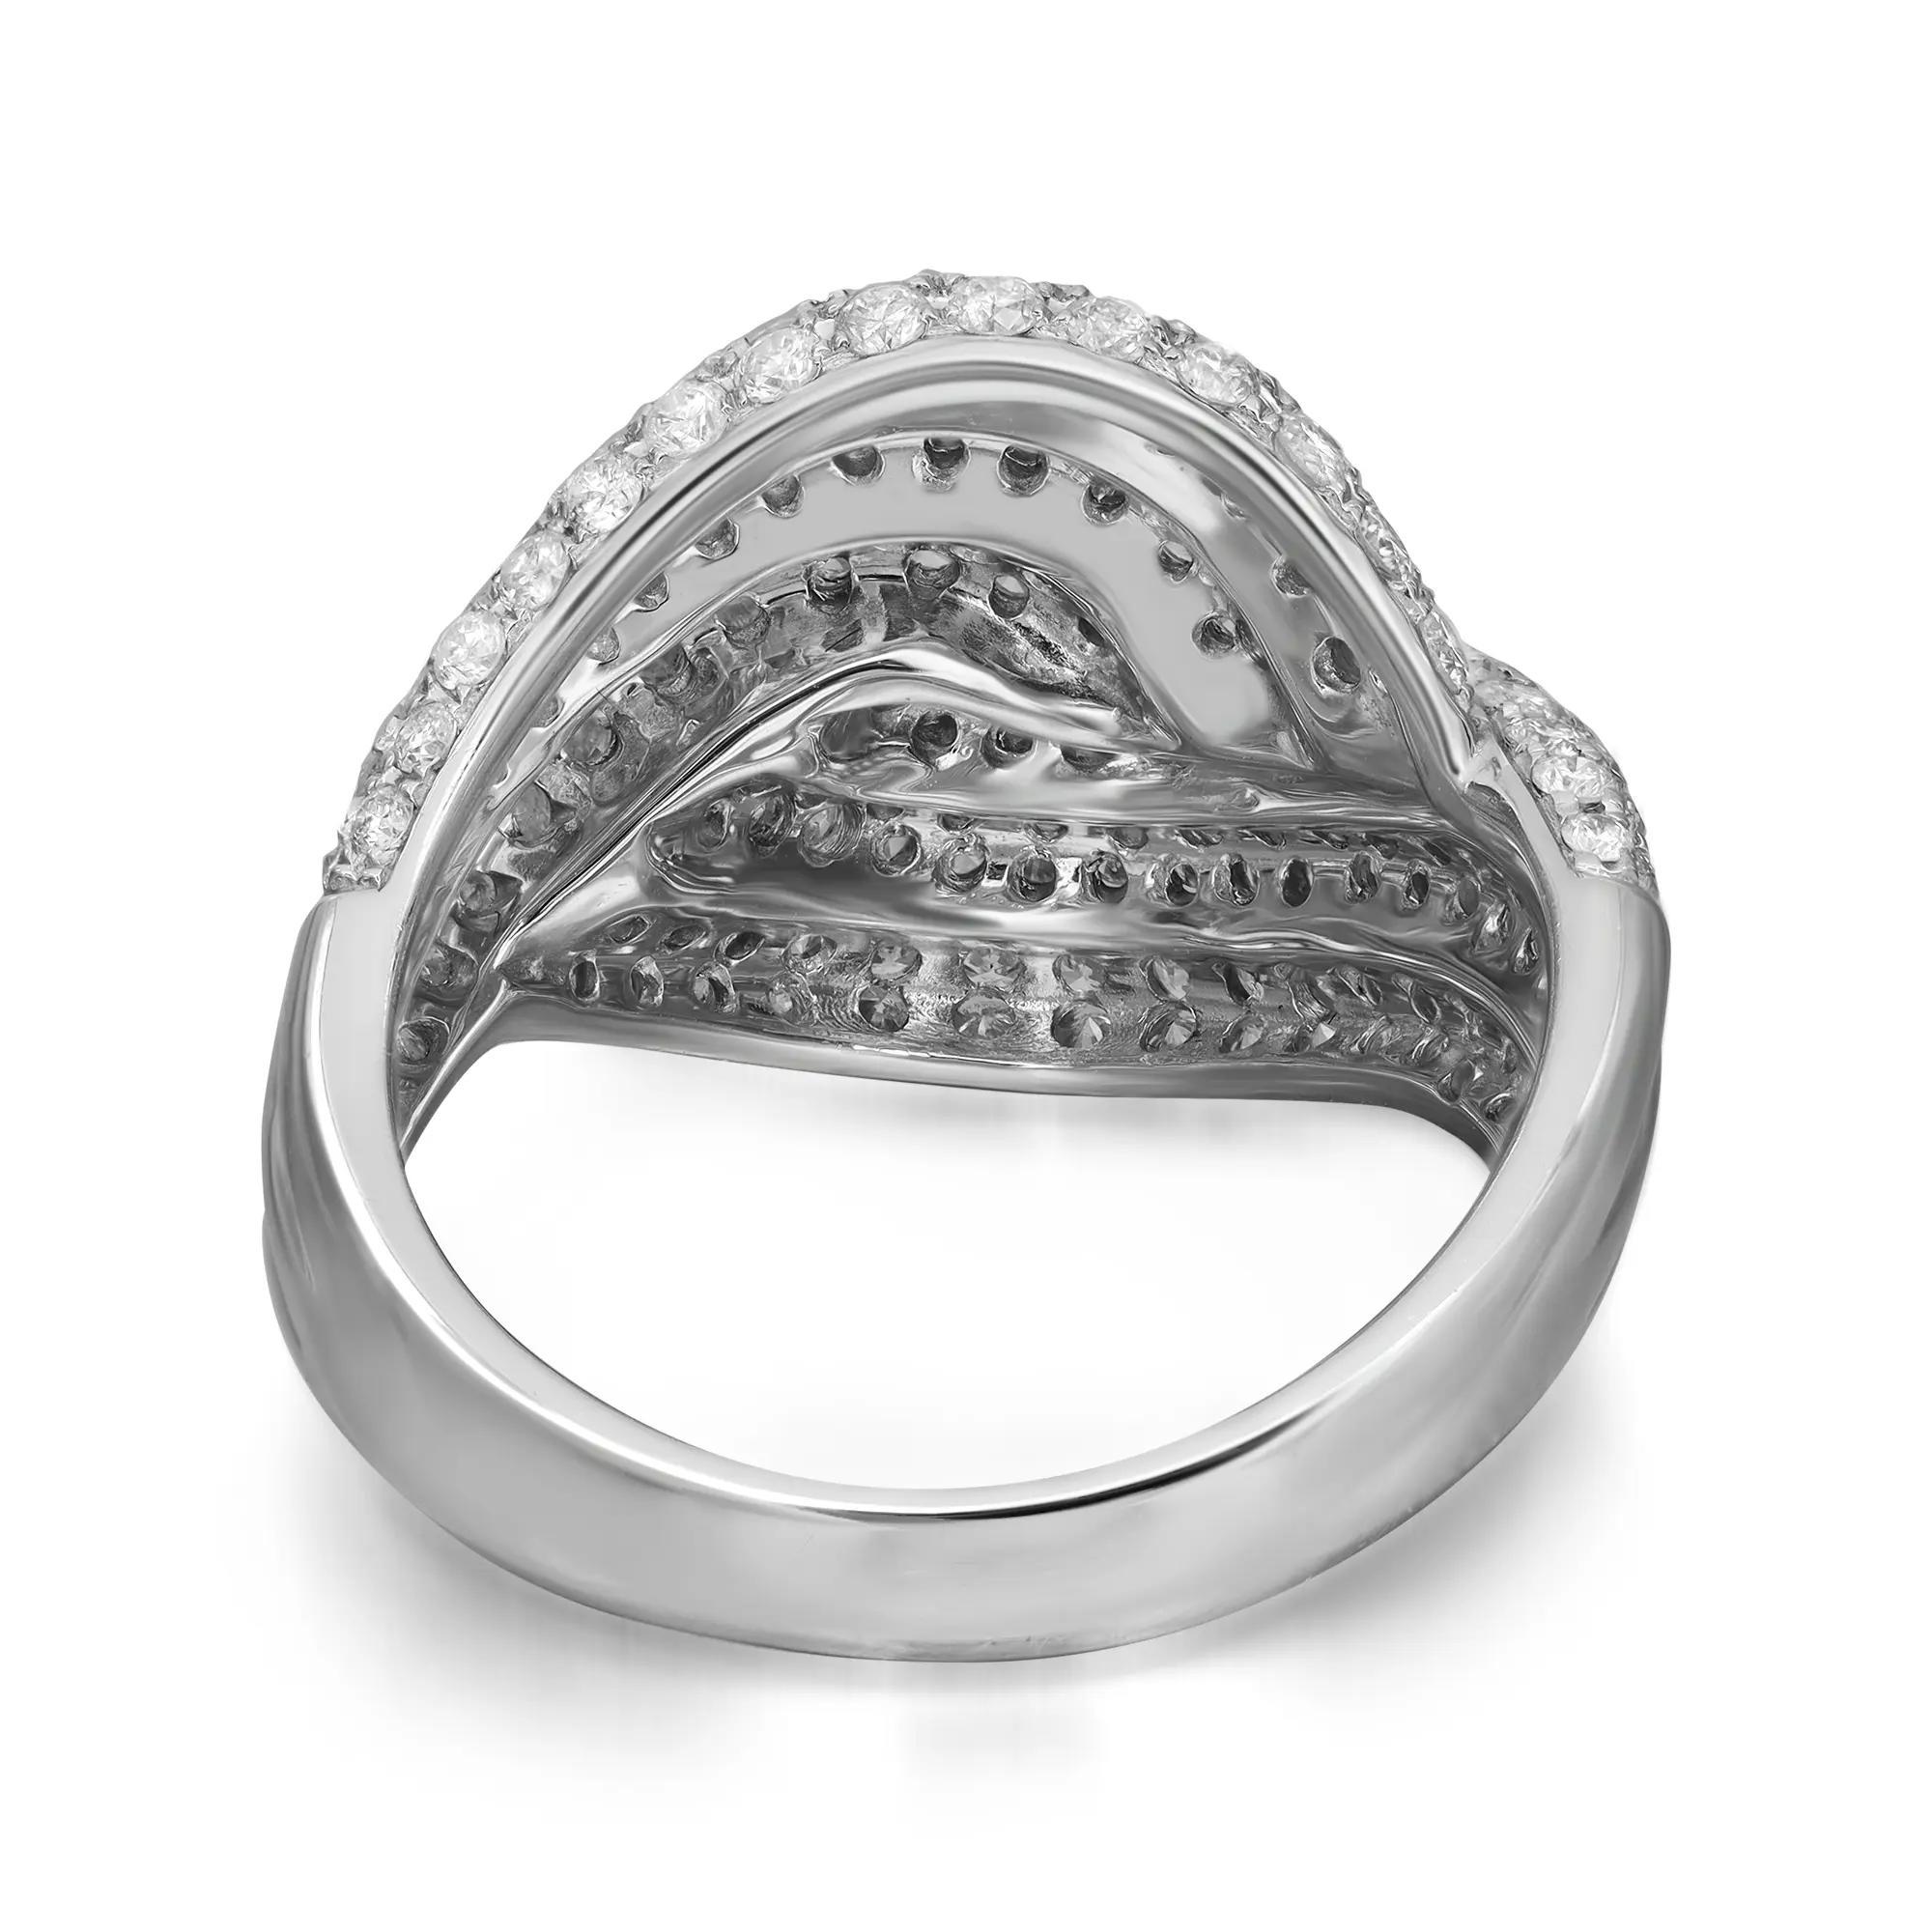 Bold and elegant diamond cocktail ring rendered in highly polished 14K white gold. 
This ring features sparkling round cut diamonds in prong setting totaling 2.03 carats.
Diamond quality: I color and SI clarity. Ring size: 7.5. Total weight: 7.00